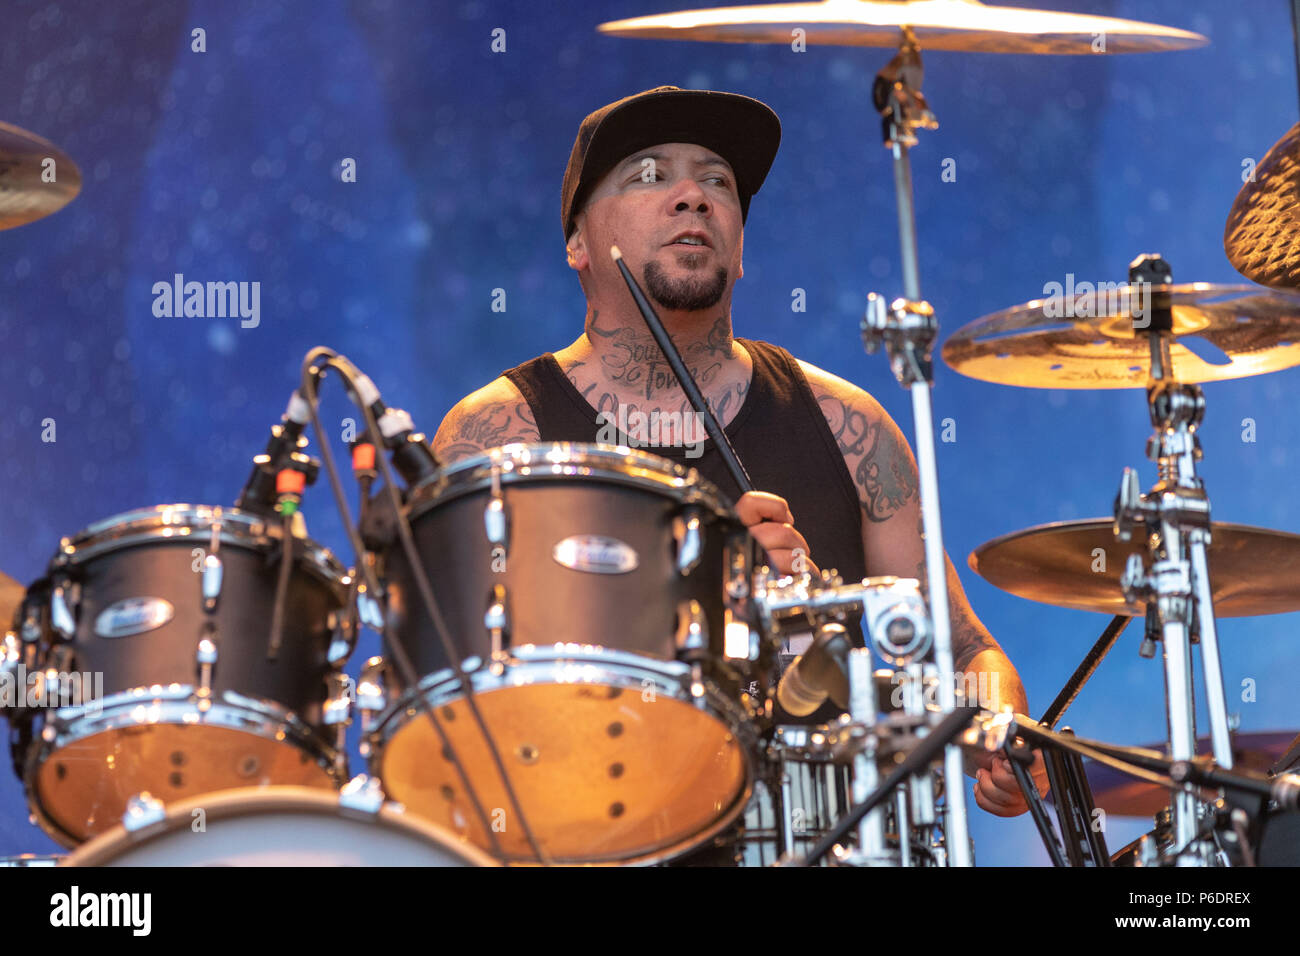 June 28, 2018 - Milwaukee, Wisconsin, U.S - WUV BERNARDO of P.O.D. performs  live at Henry Maier Festival Park during Summerfest in Milwaukee, Wisconsin  (Credit Image: © Daniel DeSlover via ZUMA Wire Stock Photo - Alamy